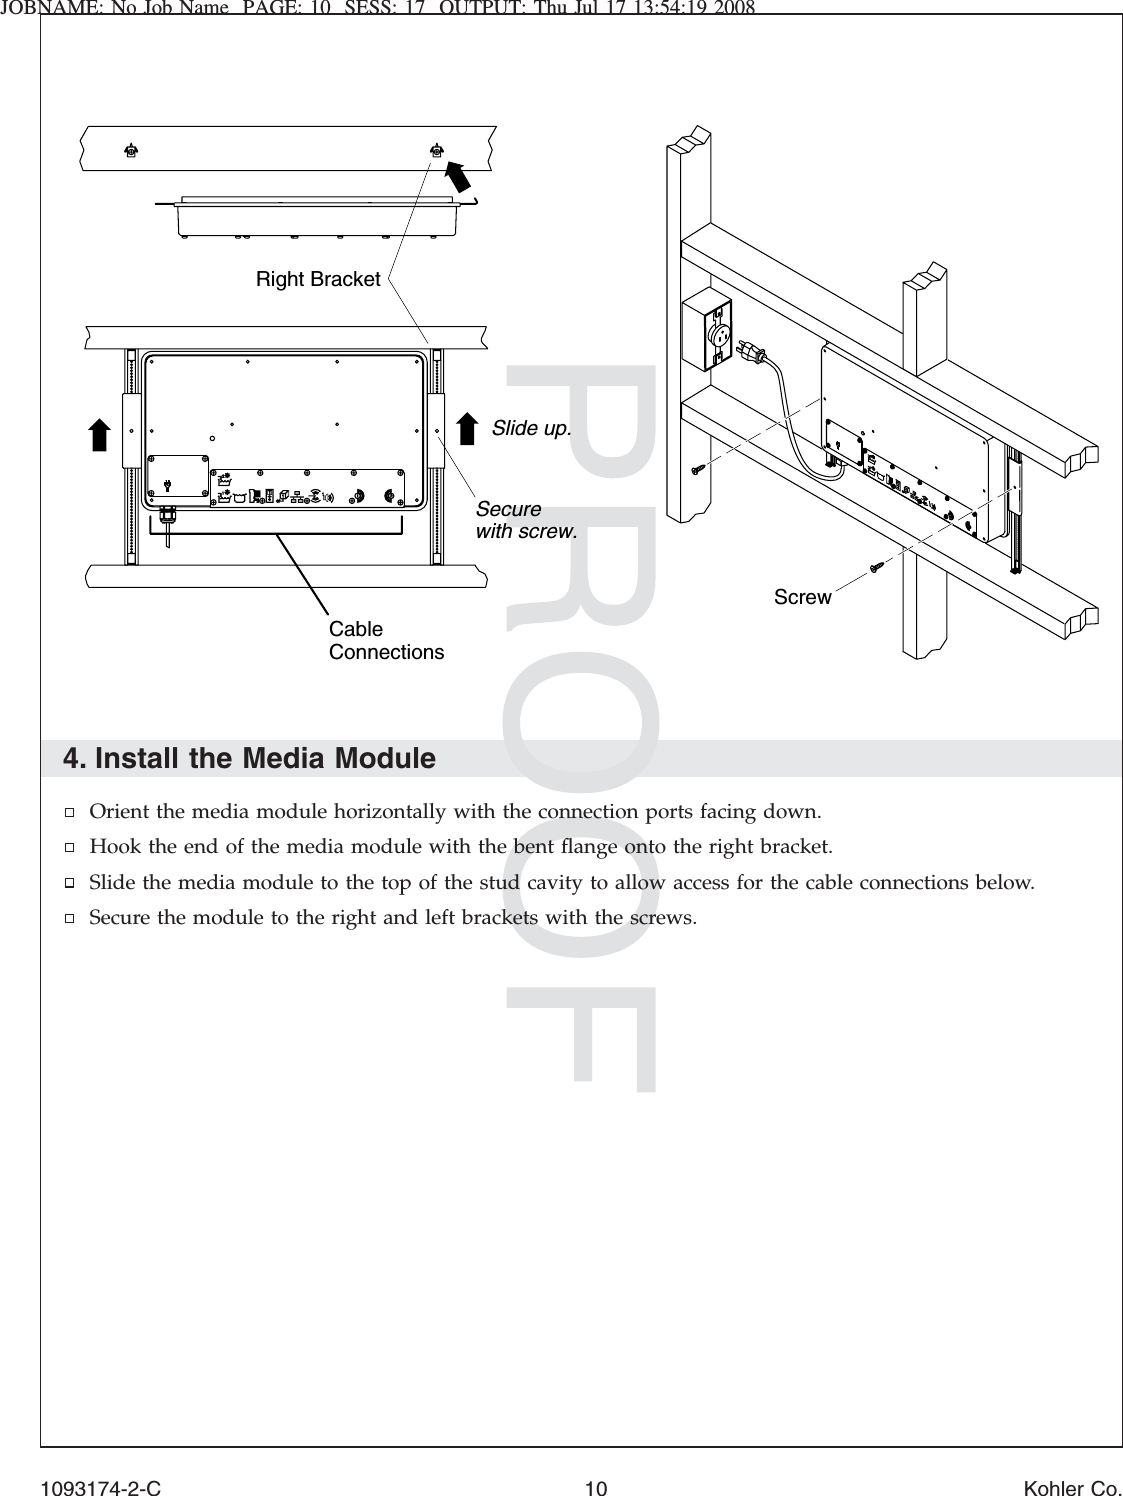 JOBNAME: No Job Name PAGE: 10 SESS: 17 OUTPUT: Thu Jul 17 13:54:19 20084. Install the Media ModuleOrient the media module horizontally with the connection ports facing down.Hook the end of the media module with the bent ﬂange onto the right bracket.Slide the media module to the top of the stud cavity to allow access for the cable connections below.Secure the module to the right and left brackets with the screws.Cable ConnectionsSlide up.ScrewRight BracketSecure with screw.1093174-2-C 10 Kohler Co.